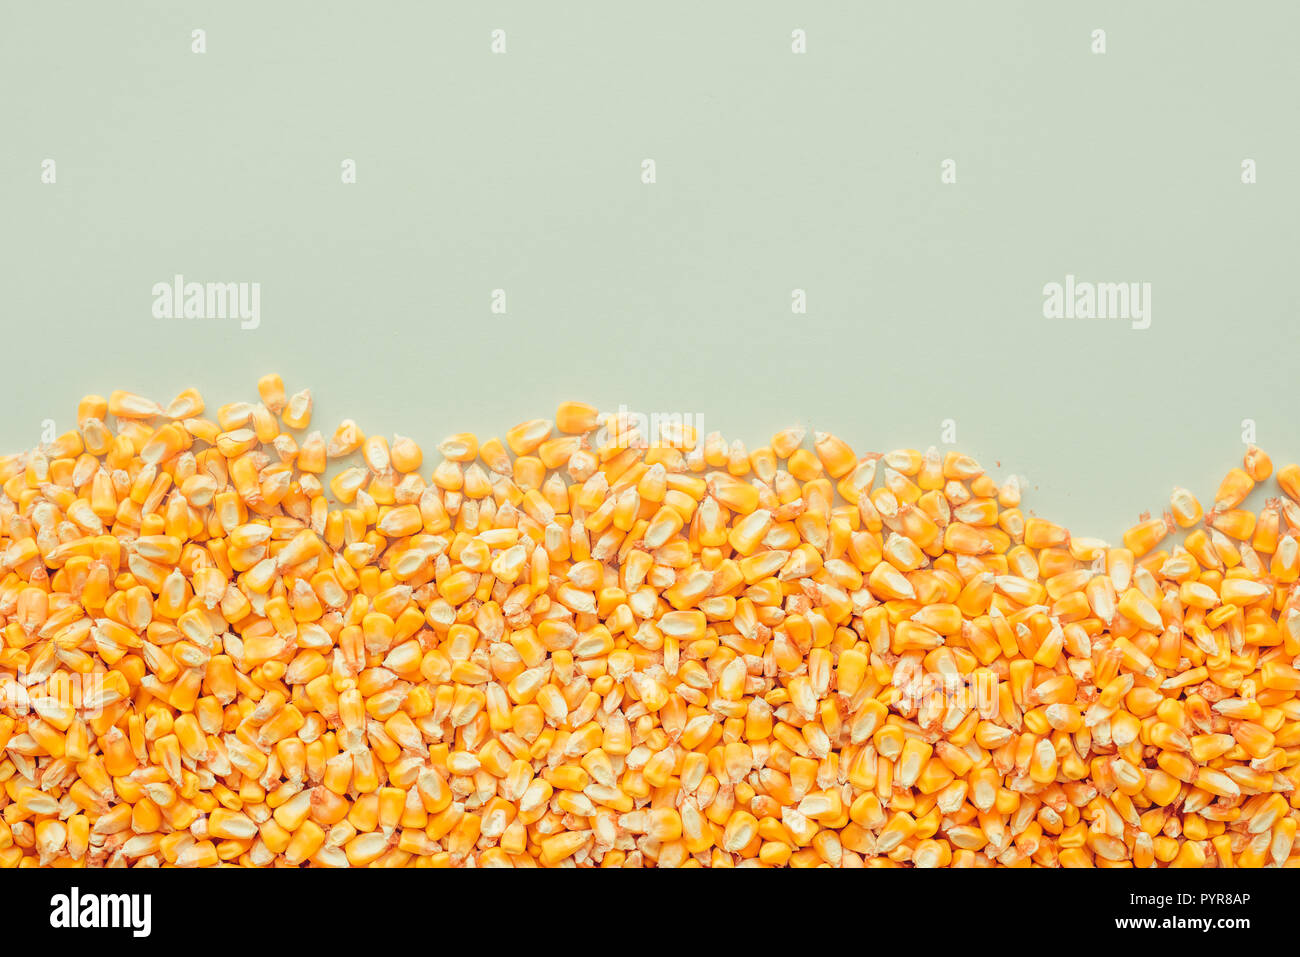 Background of harvested corn kernels with copy space, concept of abundance and great yield after successful harvest Stock Photo